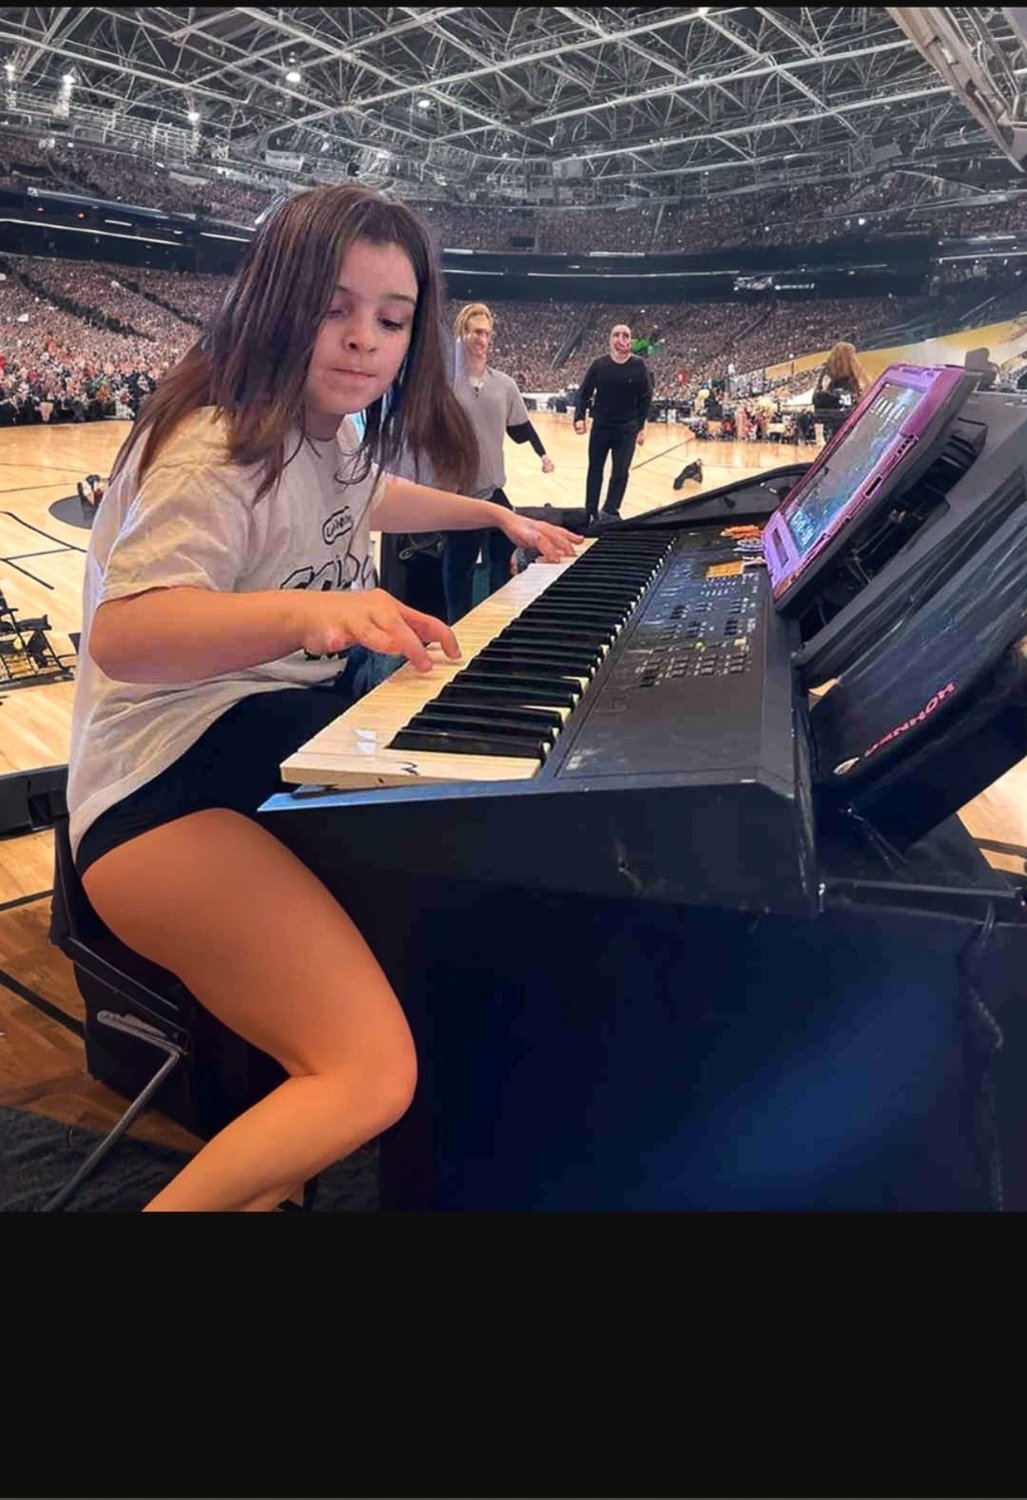 A young girl playing keyboard in sporting arena